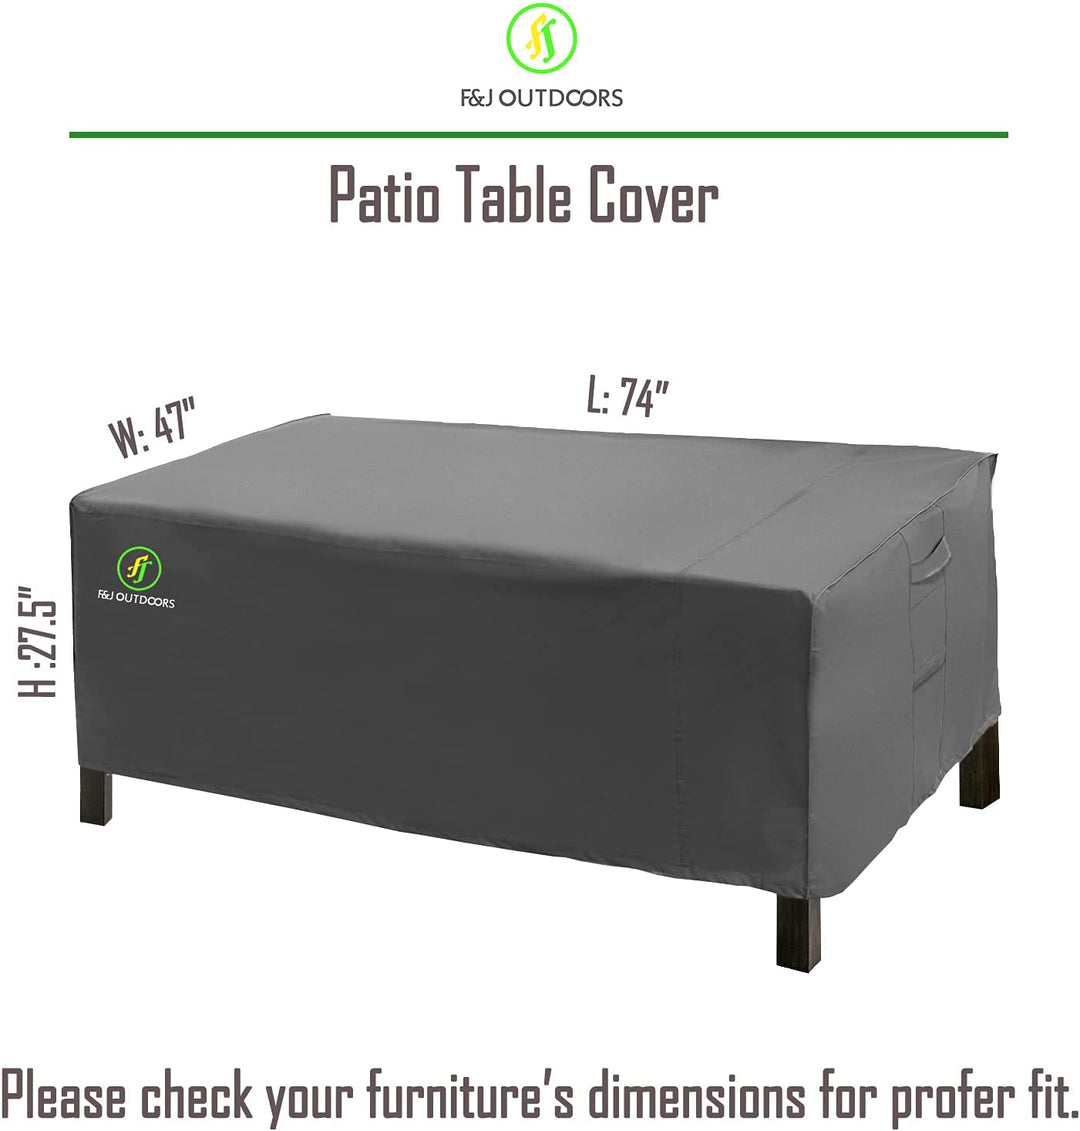 Patio Rectangular Table and Chairs Furniture Set Cover